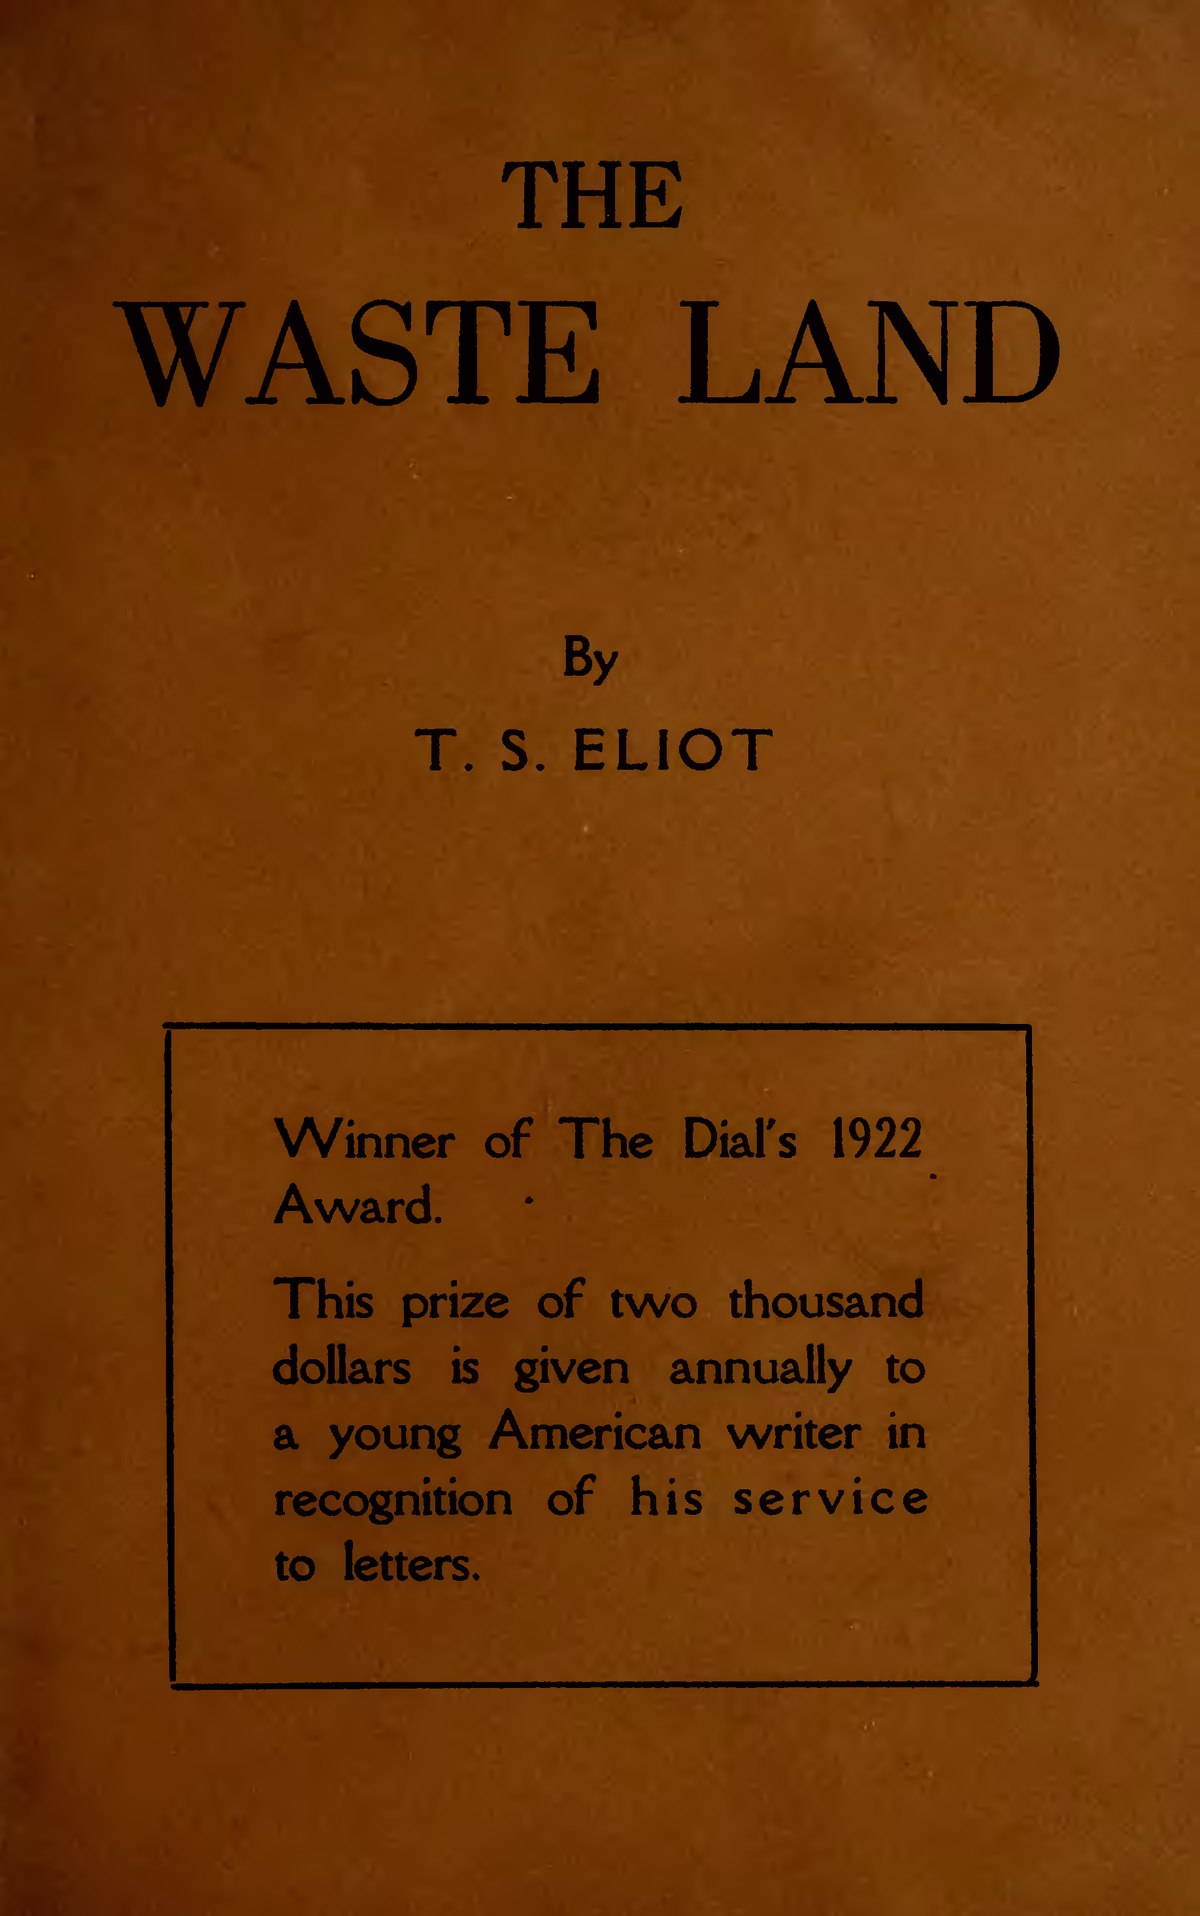 T.S Eliot's The Waste Land book cover